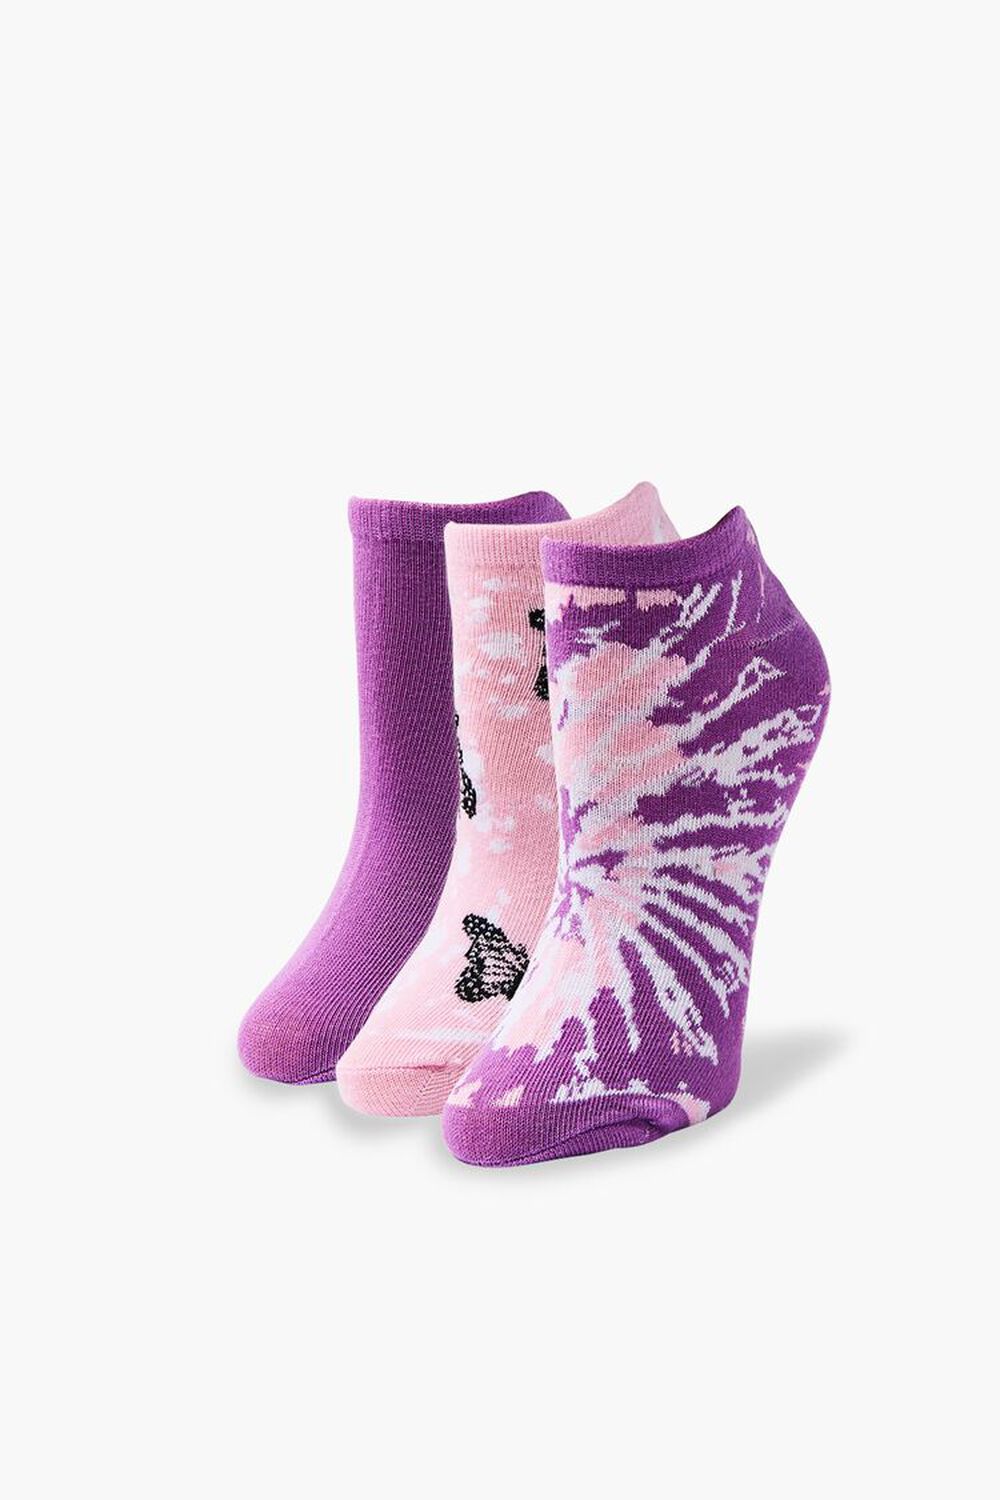 PINK/MULTI Butterfly Ankle Socks - 3 Pack, image 1